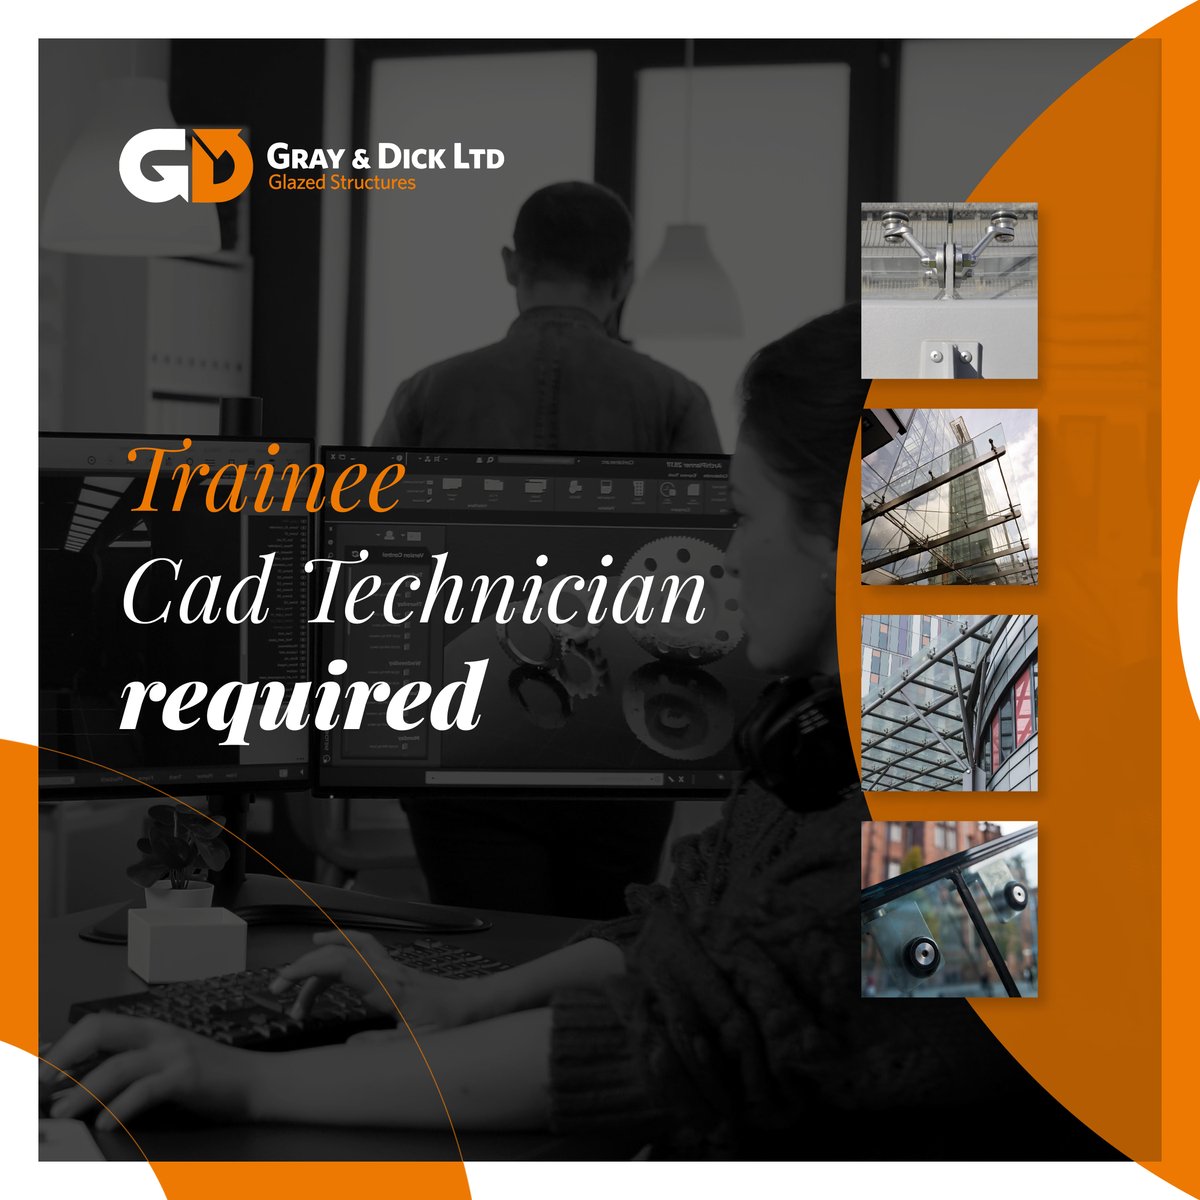 Trainee CAD Technician required. This is a great opportunity for a #CADTechnician to develop their skills, work on high-profile projects and progress within the industry. 

Visit the @GrayAndDick website to apply.
> ow.ly/kZxj50KZ5Ol 

#GlasgowJobs #Hiring #Architecture